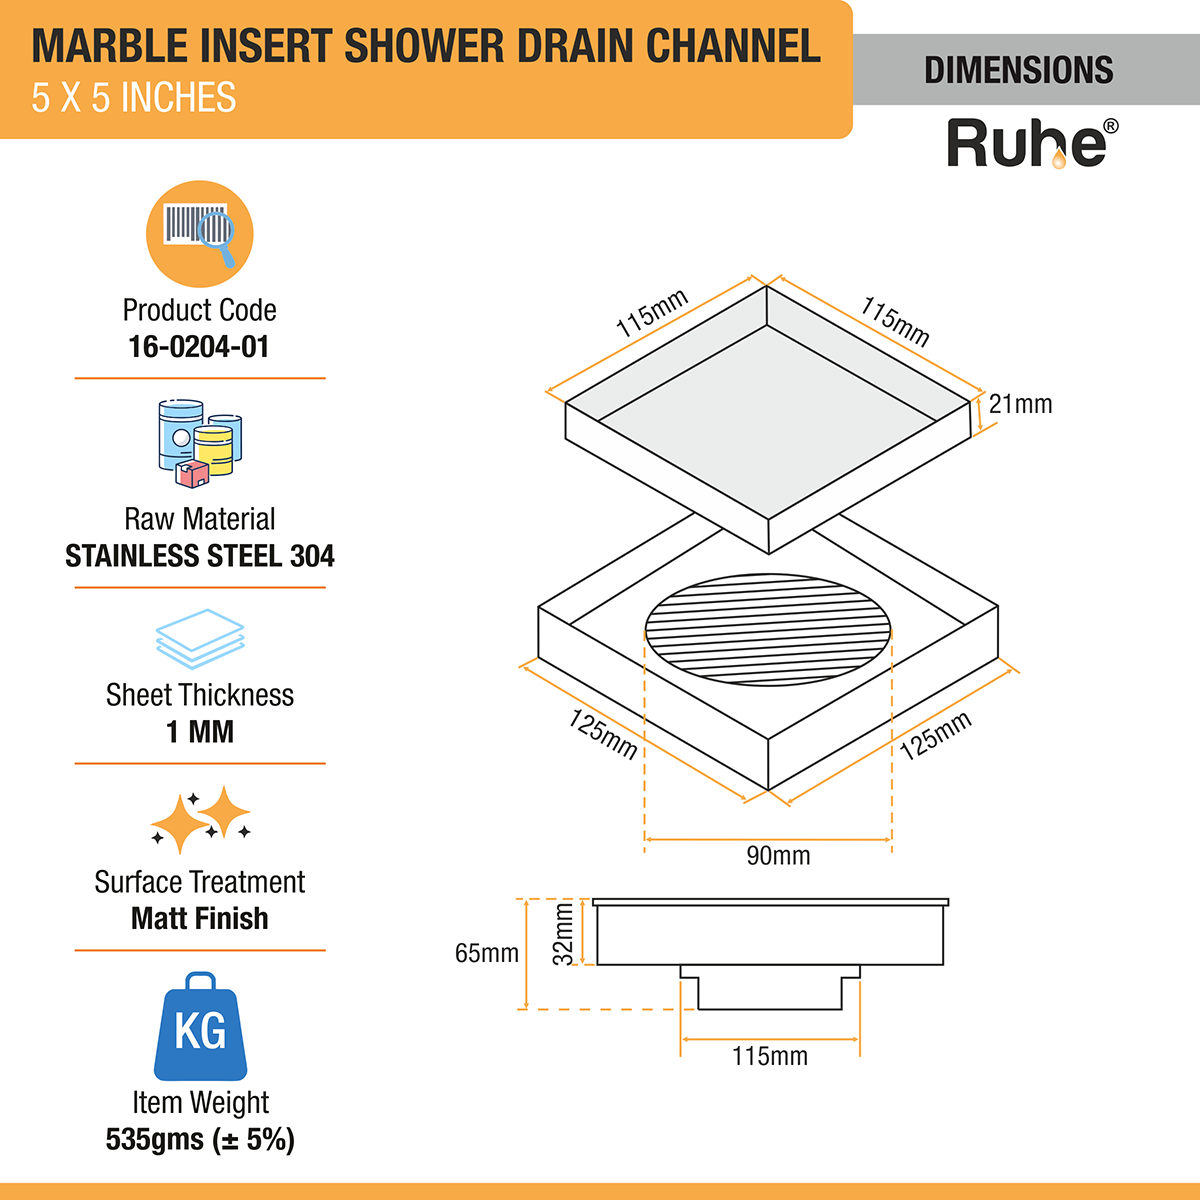 Marble Insert Shower Drain Channel (5 x 5 Inches) with Cockroach Trap (304 Grade) dimensions and size